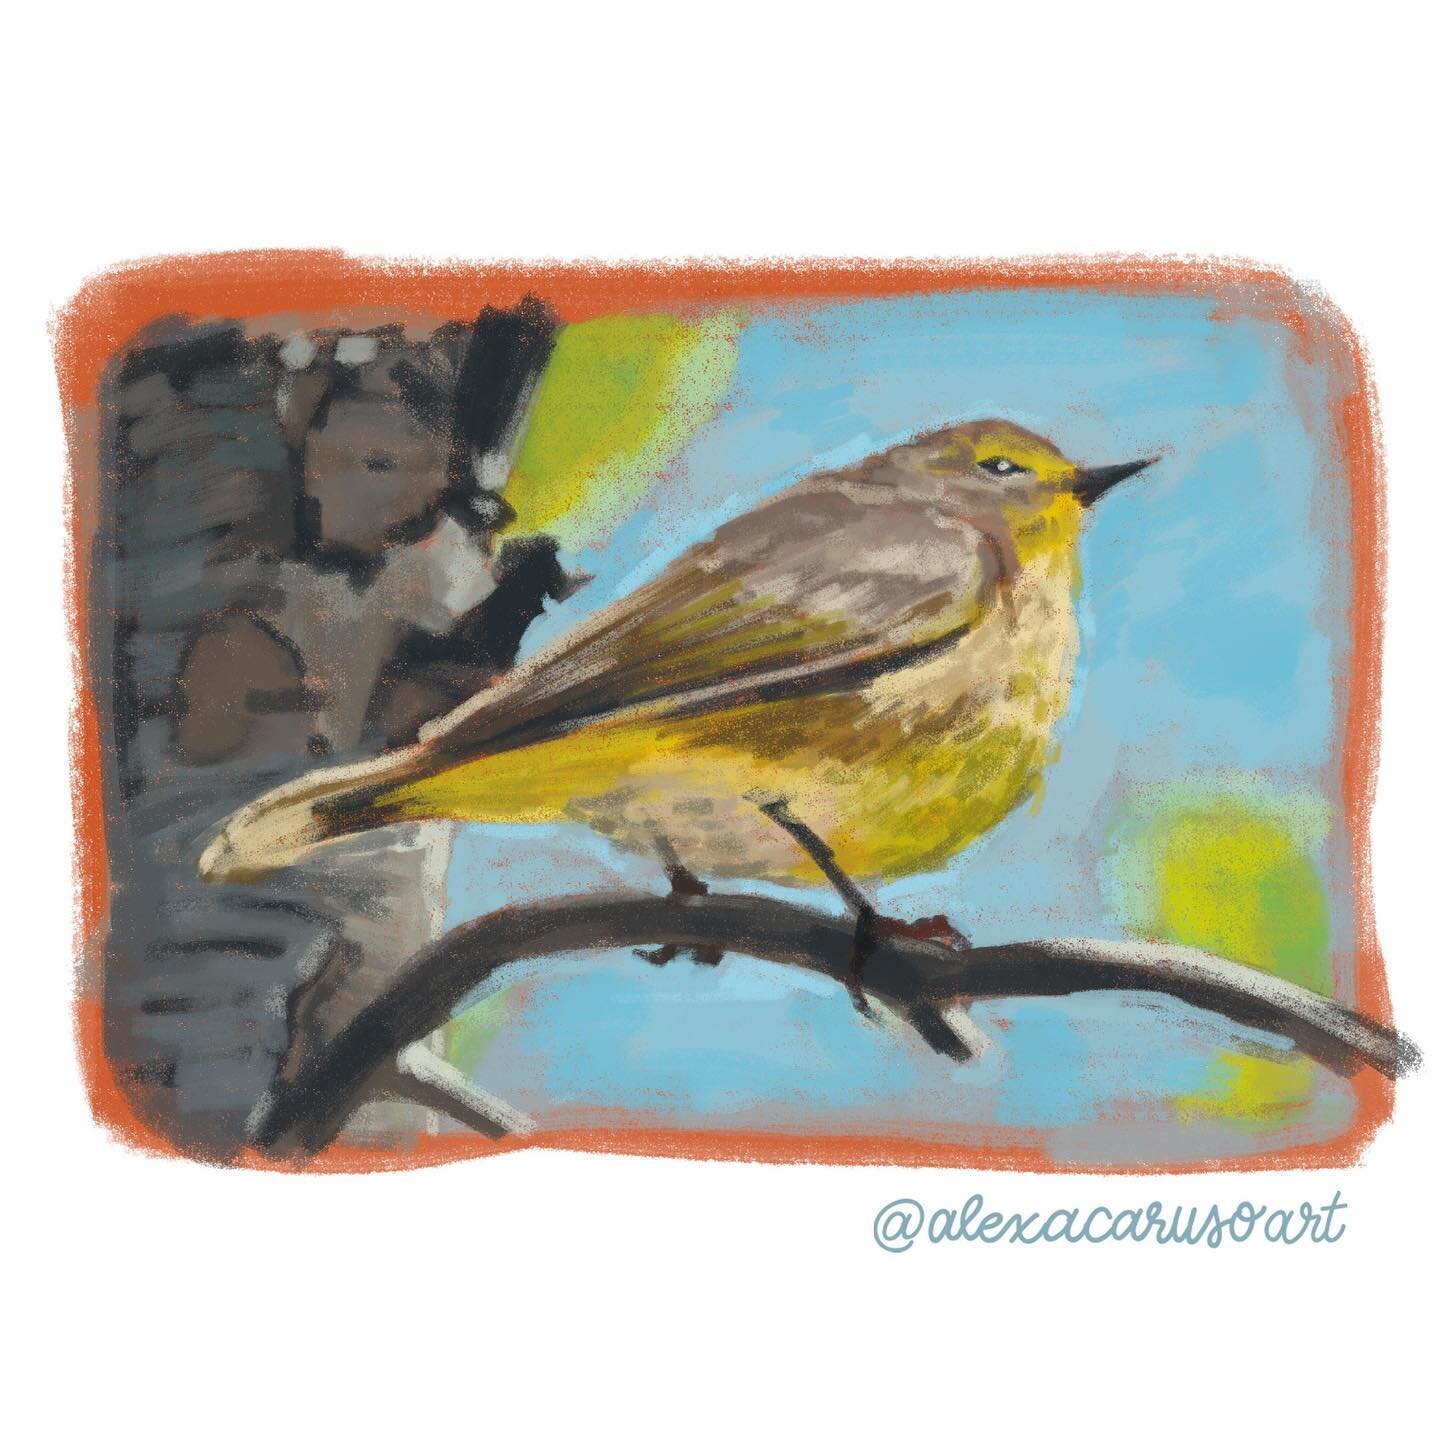 Hey! Good to see you again! Just wanted to show y&rsquo;all a neat bird I drew - a palm warbler based on a photo from my aunt. Enjoy! 💛
&bull;
&bull;
&bull;
&bull;
&bull;
#illustration #palmwarbler #painting #birds #natureart #birding